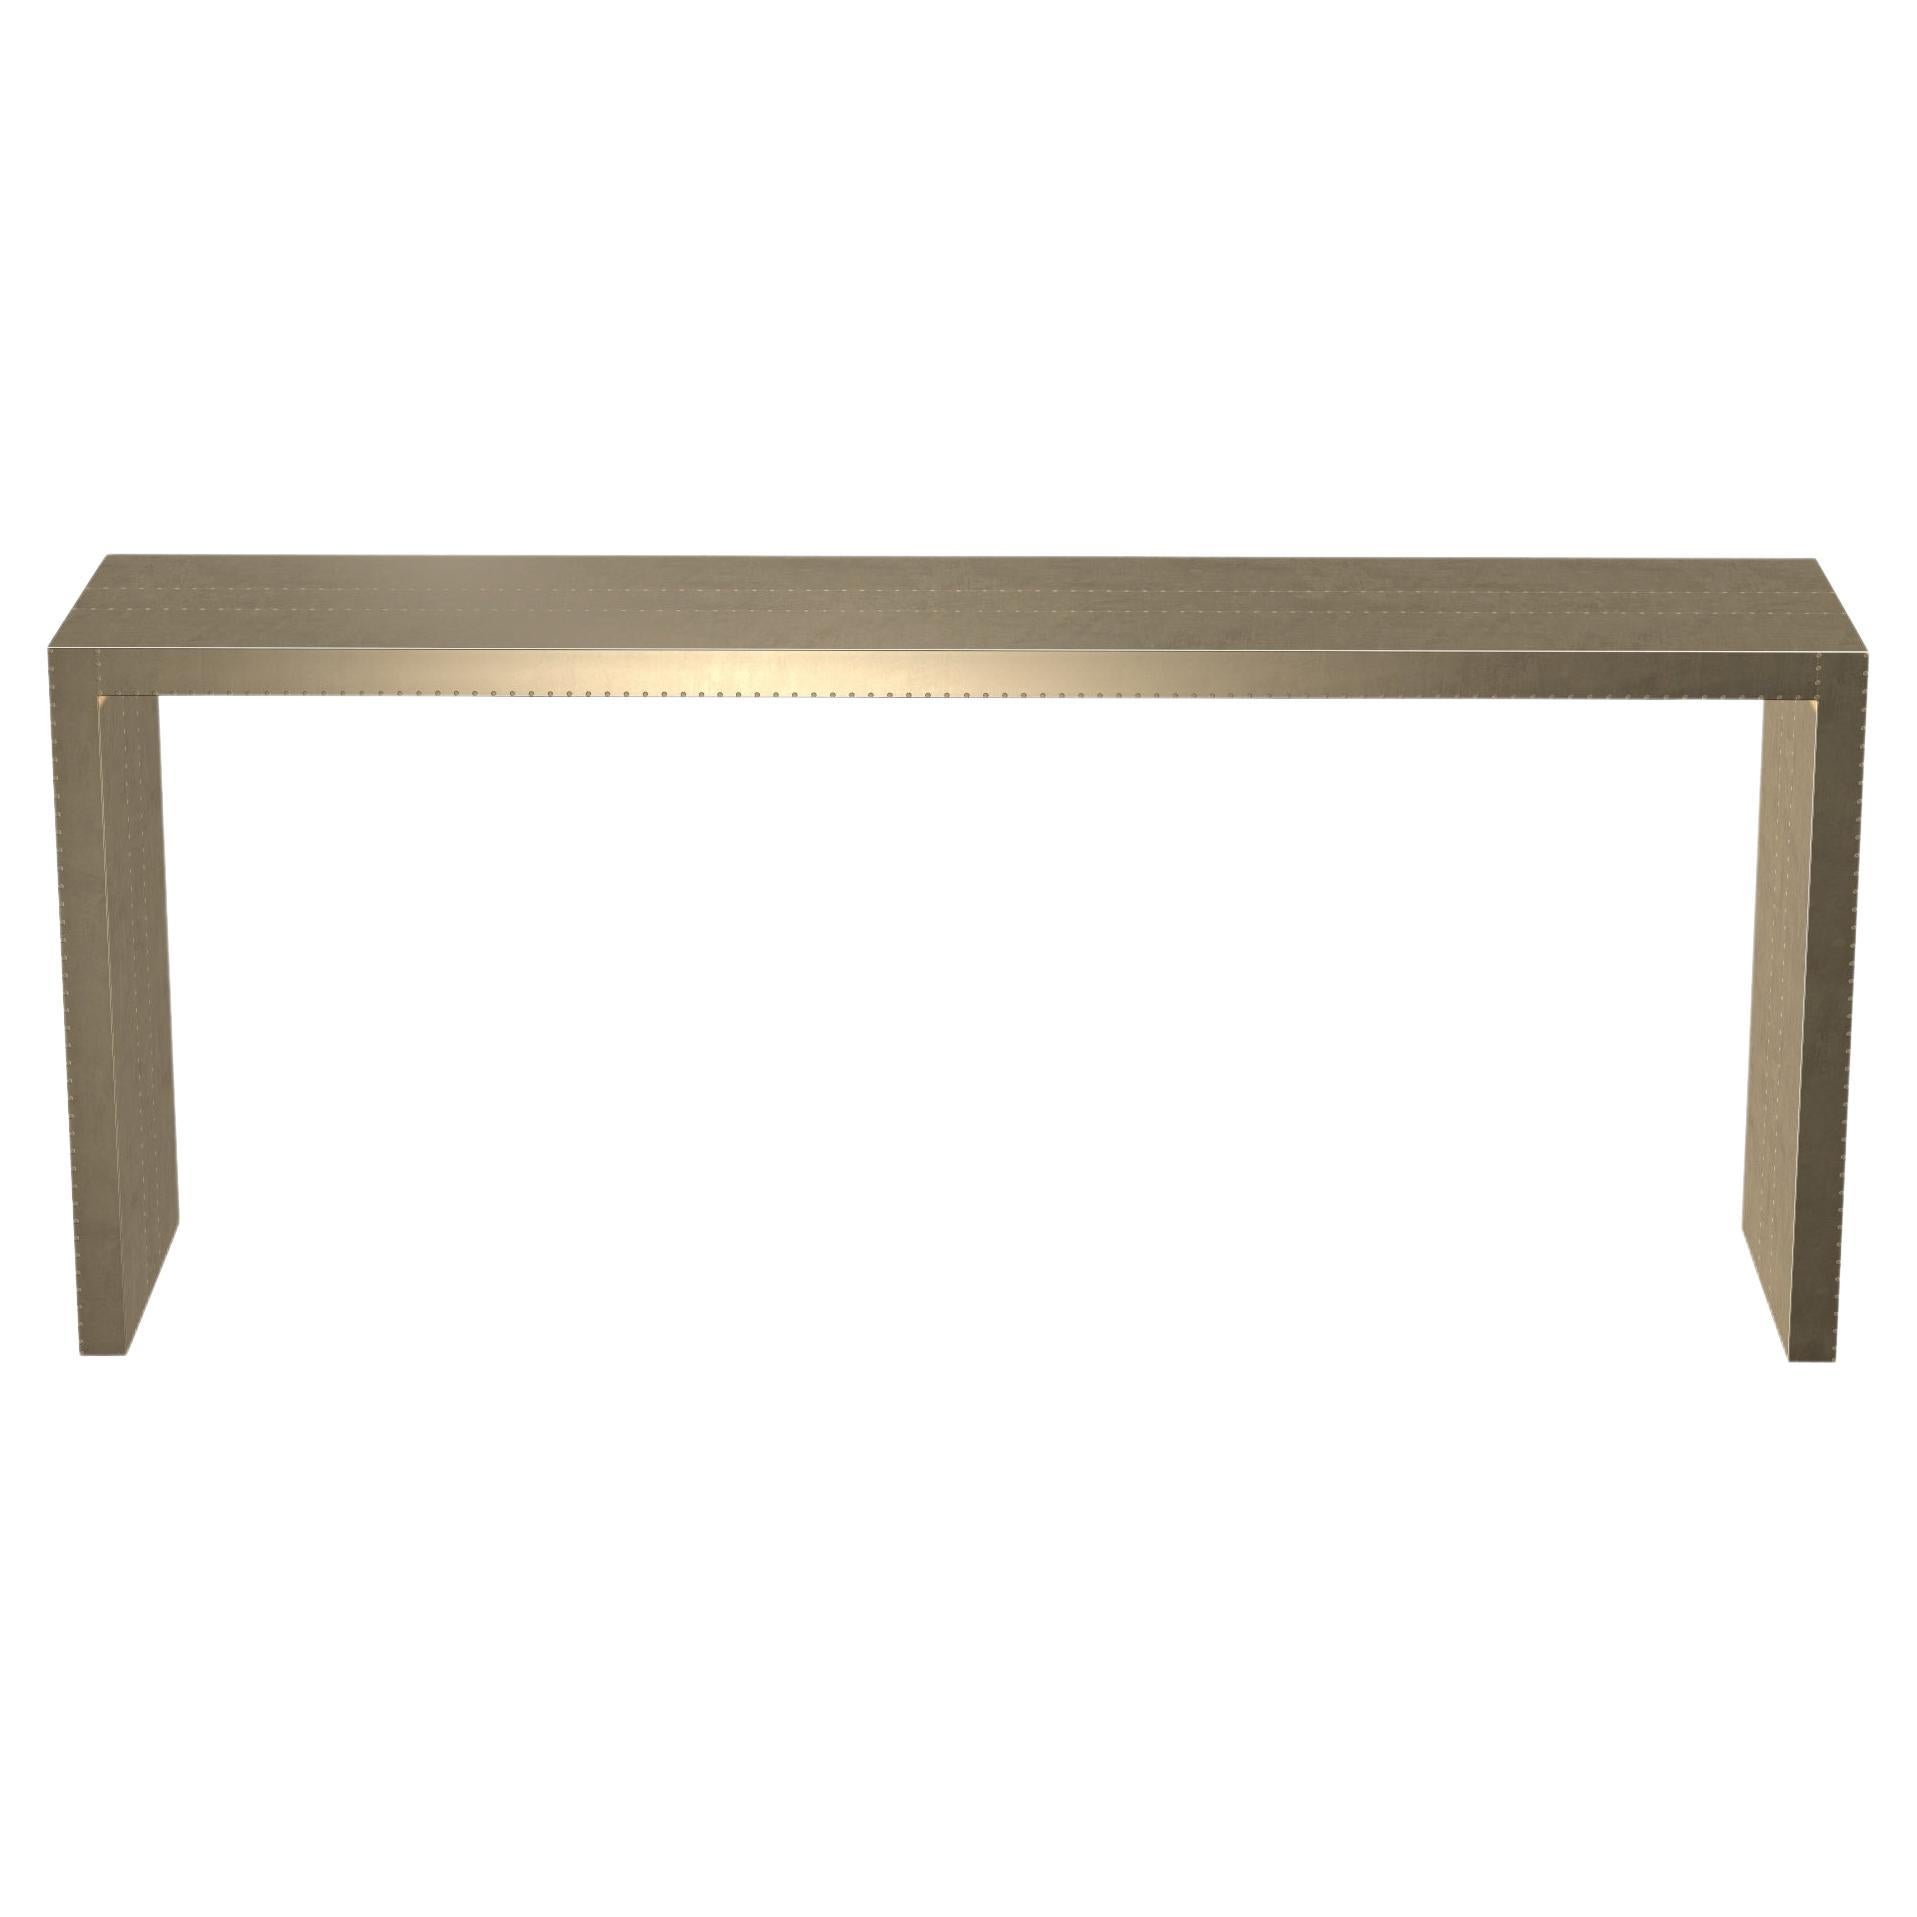 Art Deco Industrial and Work Tables Rectangular Console in Smooth Brass 